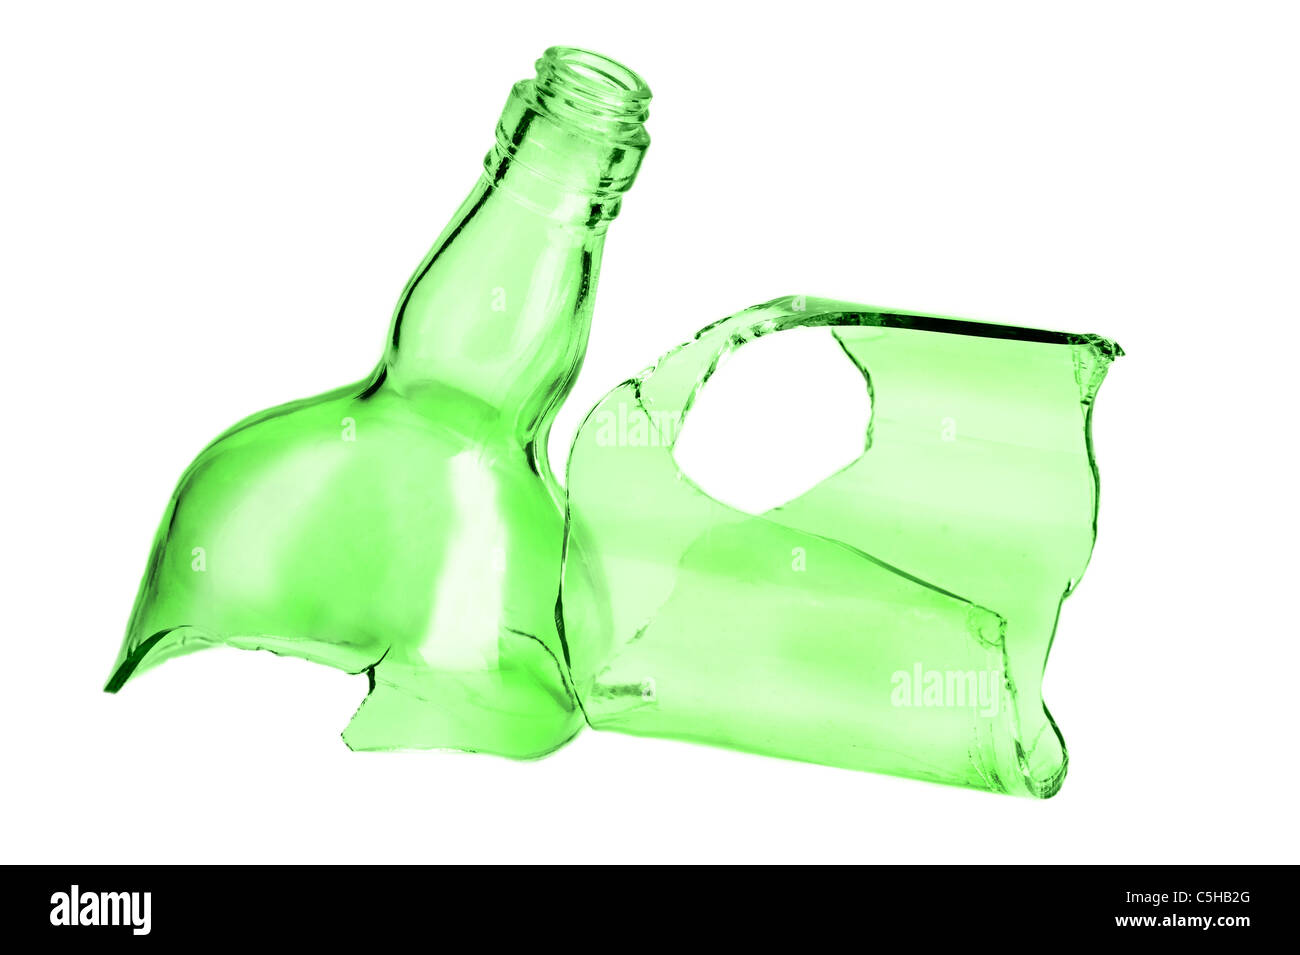 Parts of broken green bottle isolated on white background Stock Photo